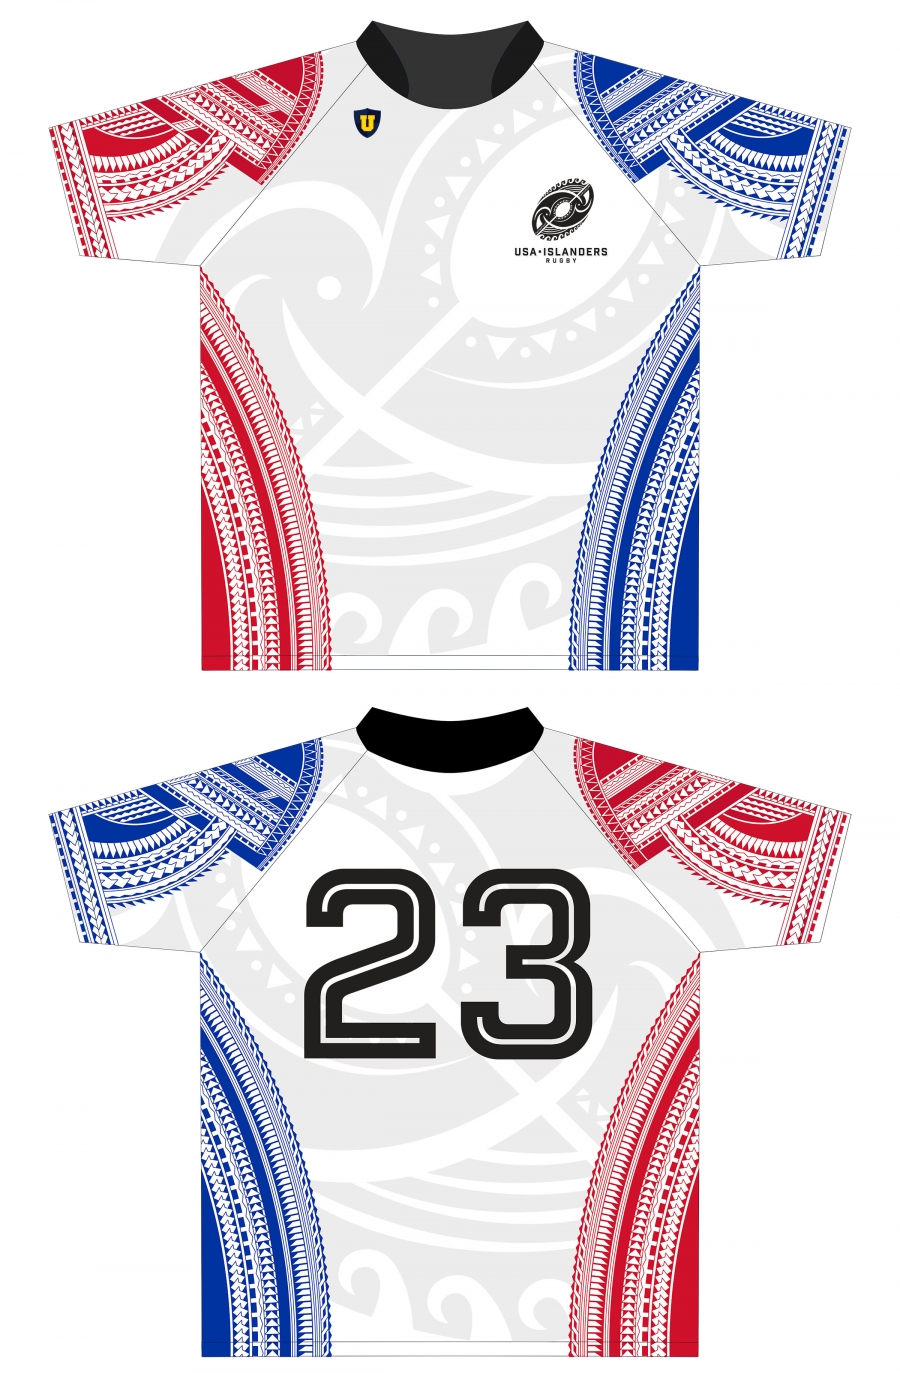 USA Islanders Custom Rugby Jerseys with Red, White and Blue coloring